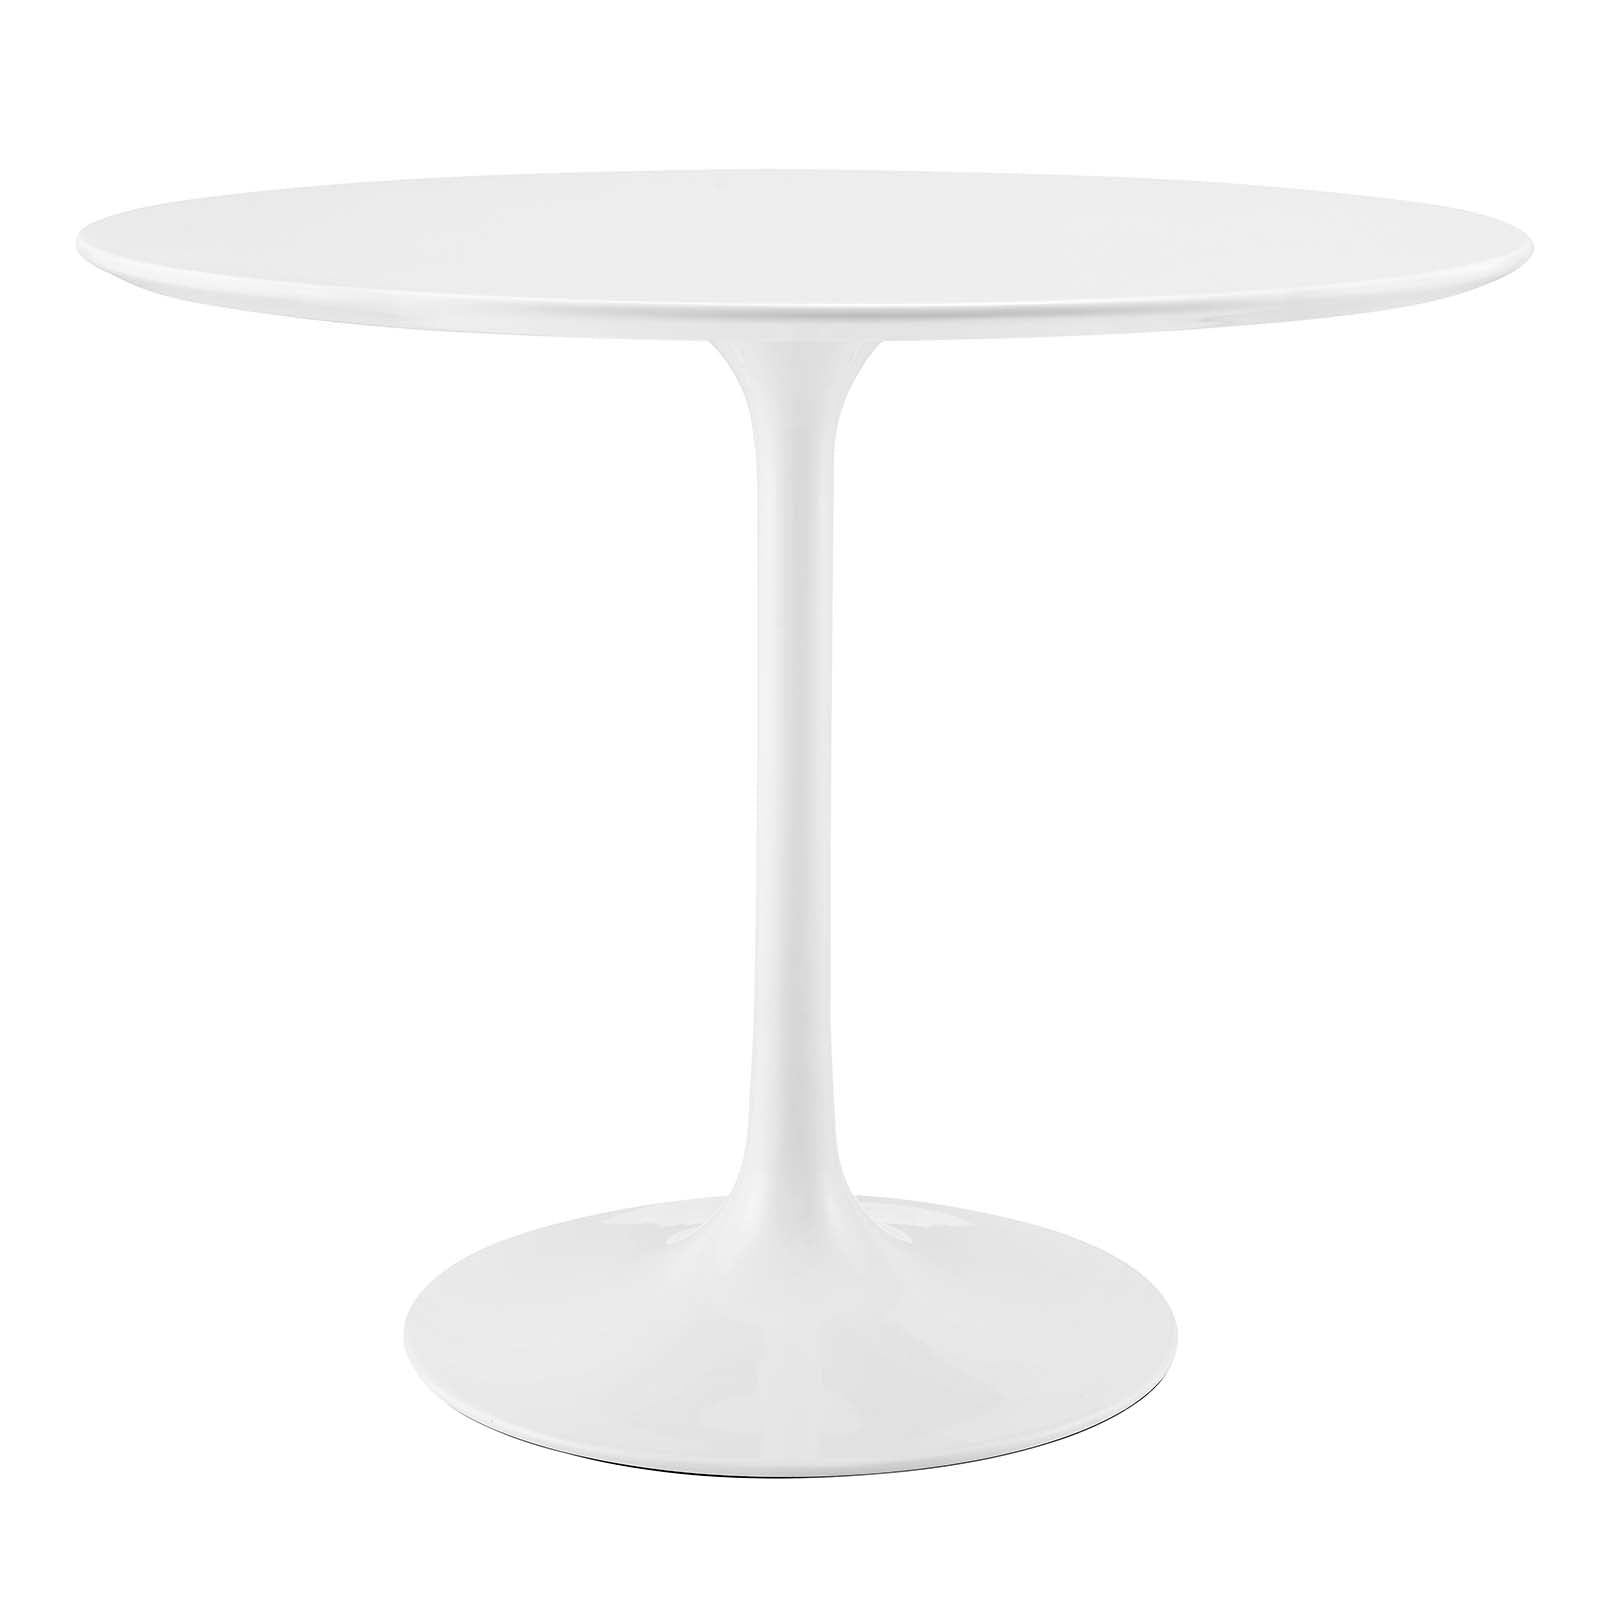 Lippa 36" Round Wood Top Dining Table